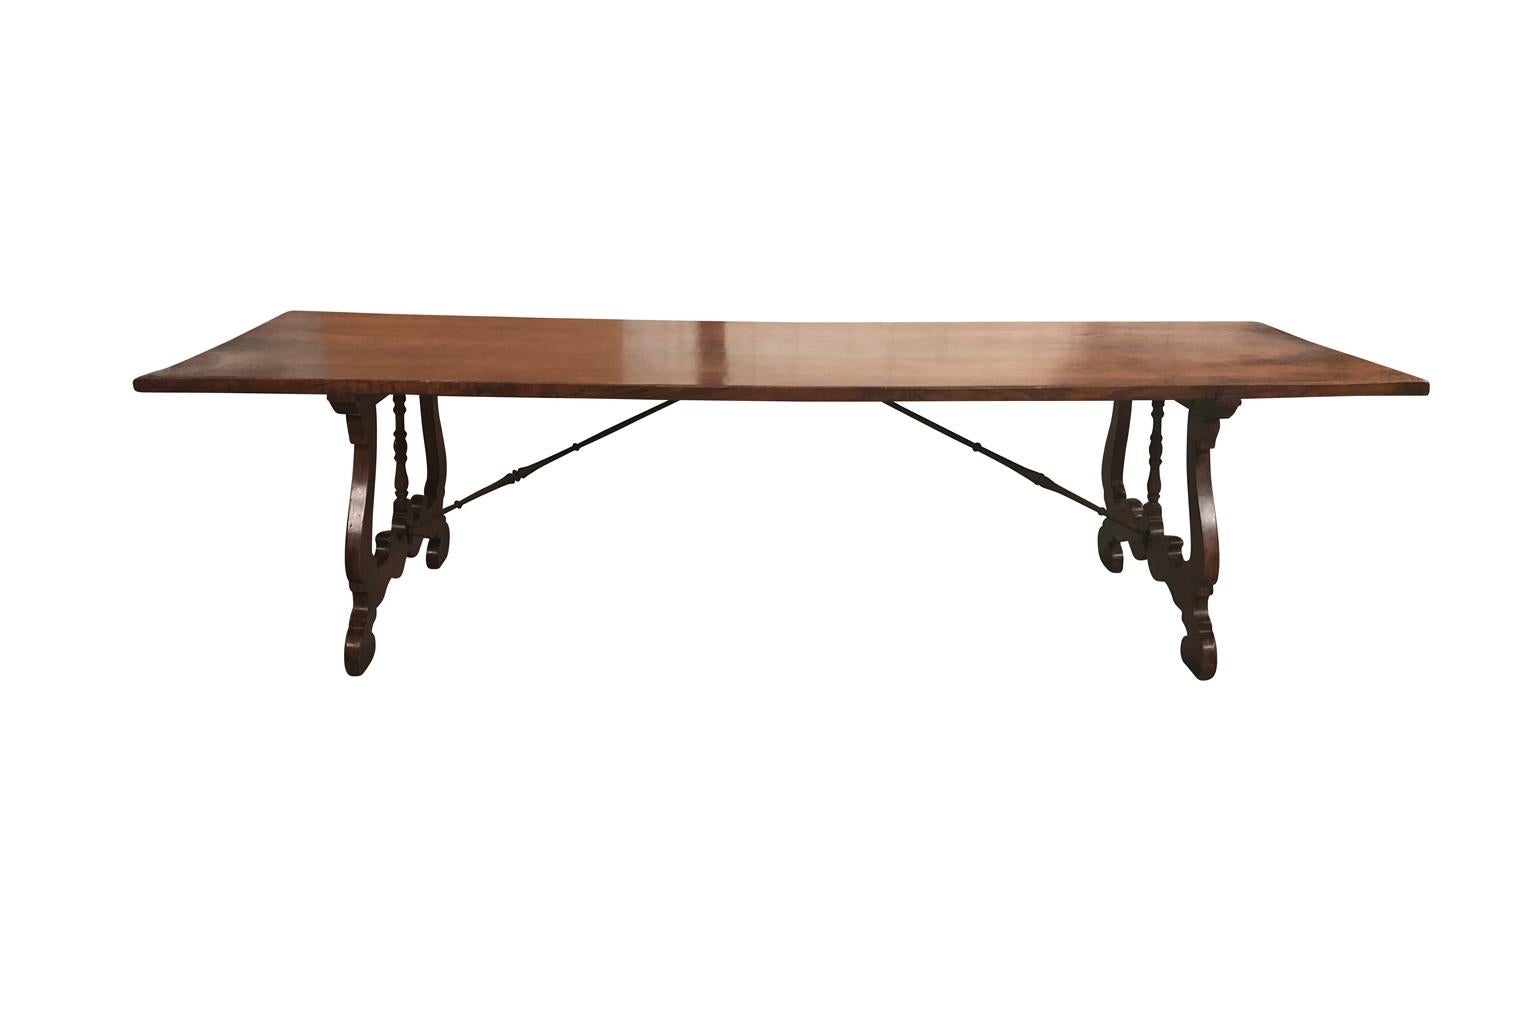 A stunning later 19th century dining table from northern Italy. Beautifully constructed from chestnut and hand forged iron stretchers with a nice thick top and classical lyre shaped legs. Wonderful patina and graining - rich and luminous.